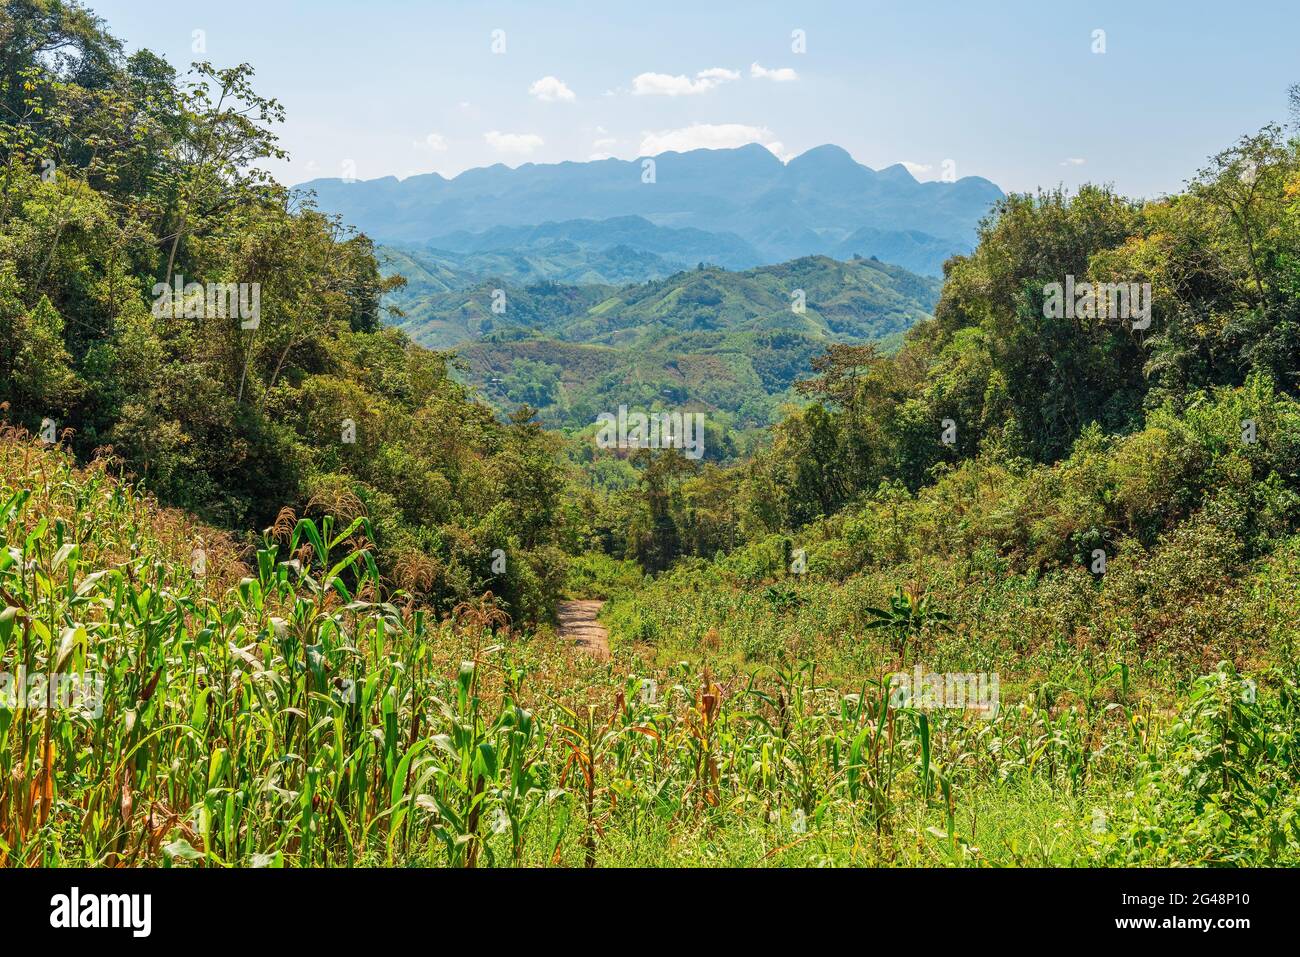 Corn field in the Guatemalan highlands in the region of Lanquin, Semuc Champey and Coban, Alta Verapaz state, Guatemala. Stock Photo